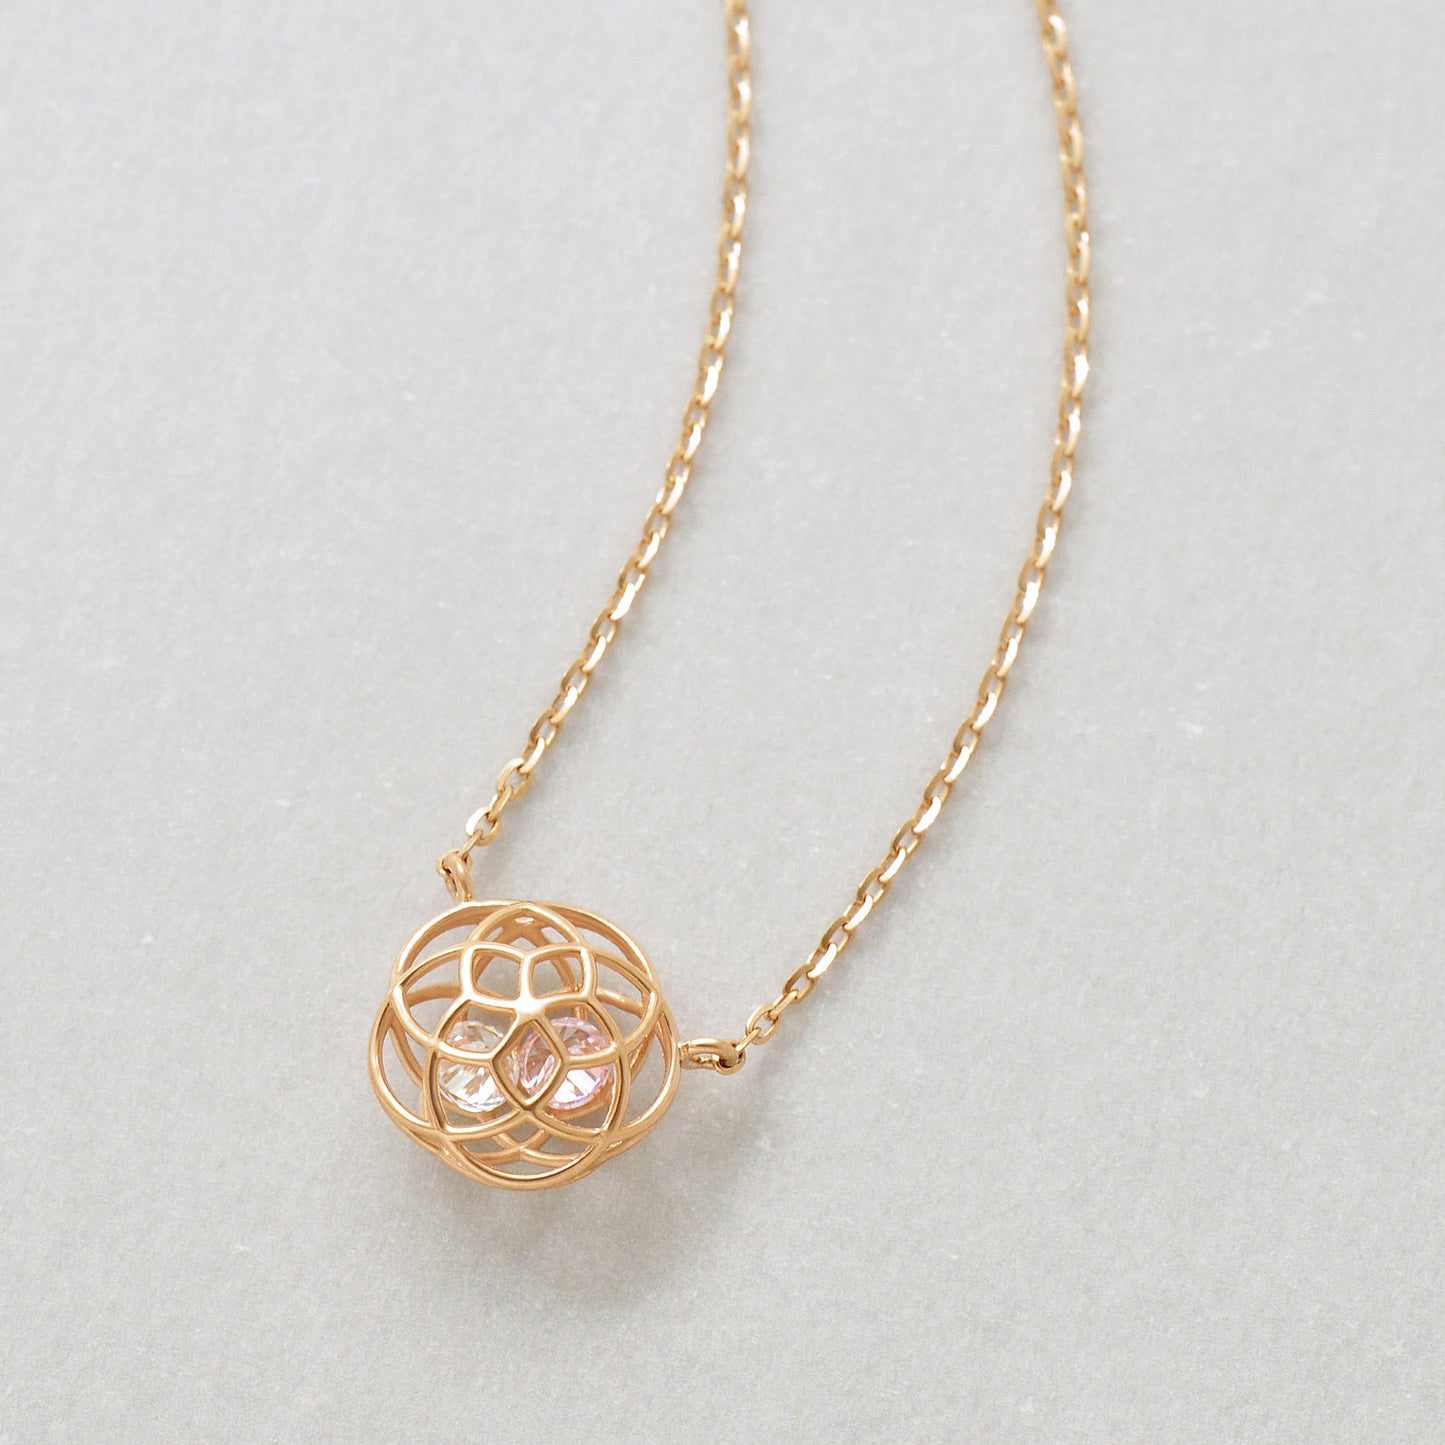 [Pannier] 10K Limited Quantity Necklace “Cherry Blossoms” (Rose Gold) - Product Image